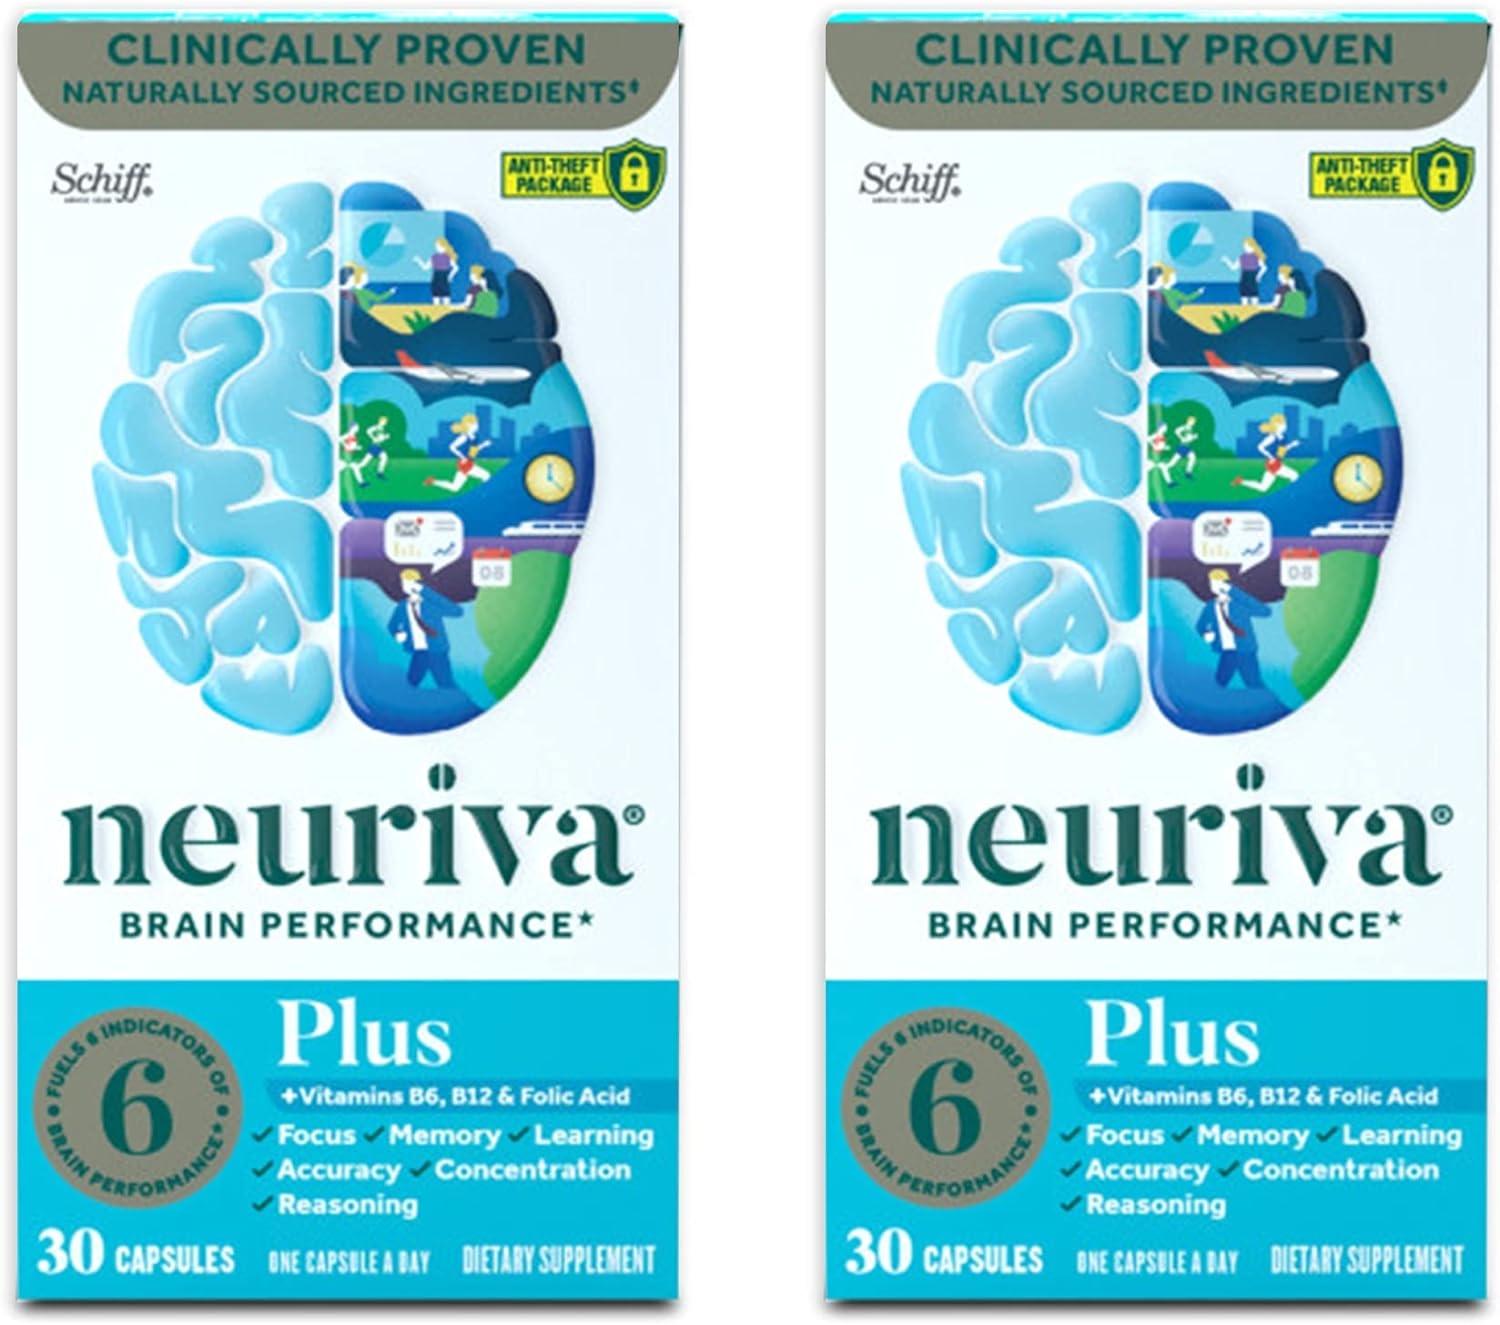 Nootropic Brain Support Supplement - NEURIVA Plus Capsules (30ct) Phosphatidylserine, B6, B12, Folic Acid - Supports Focus, Memory, Learning, Accuracy, Concentration & Reasoning (Pack of 2)